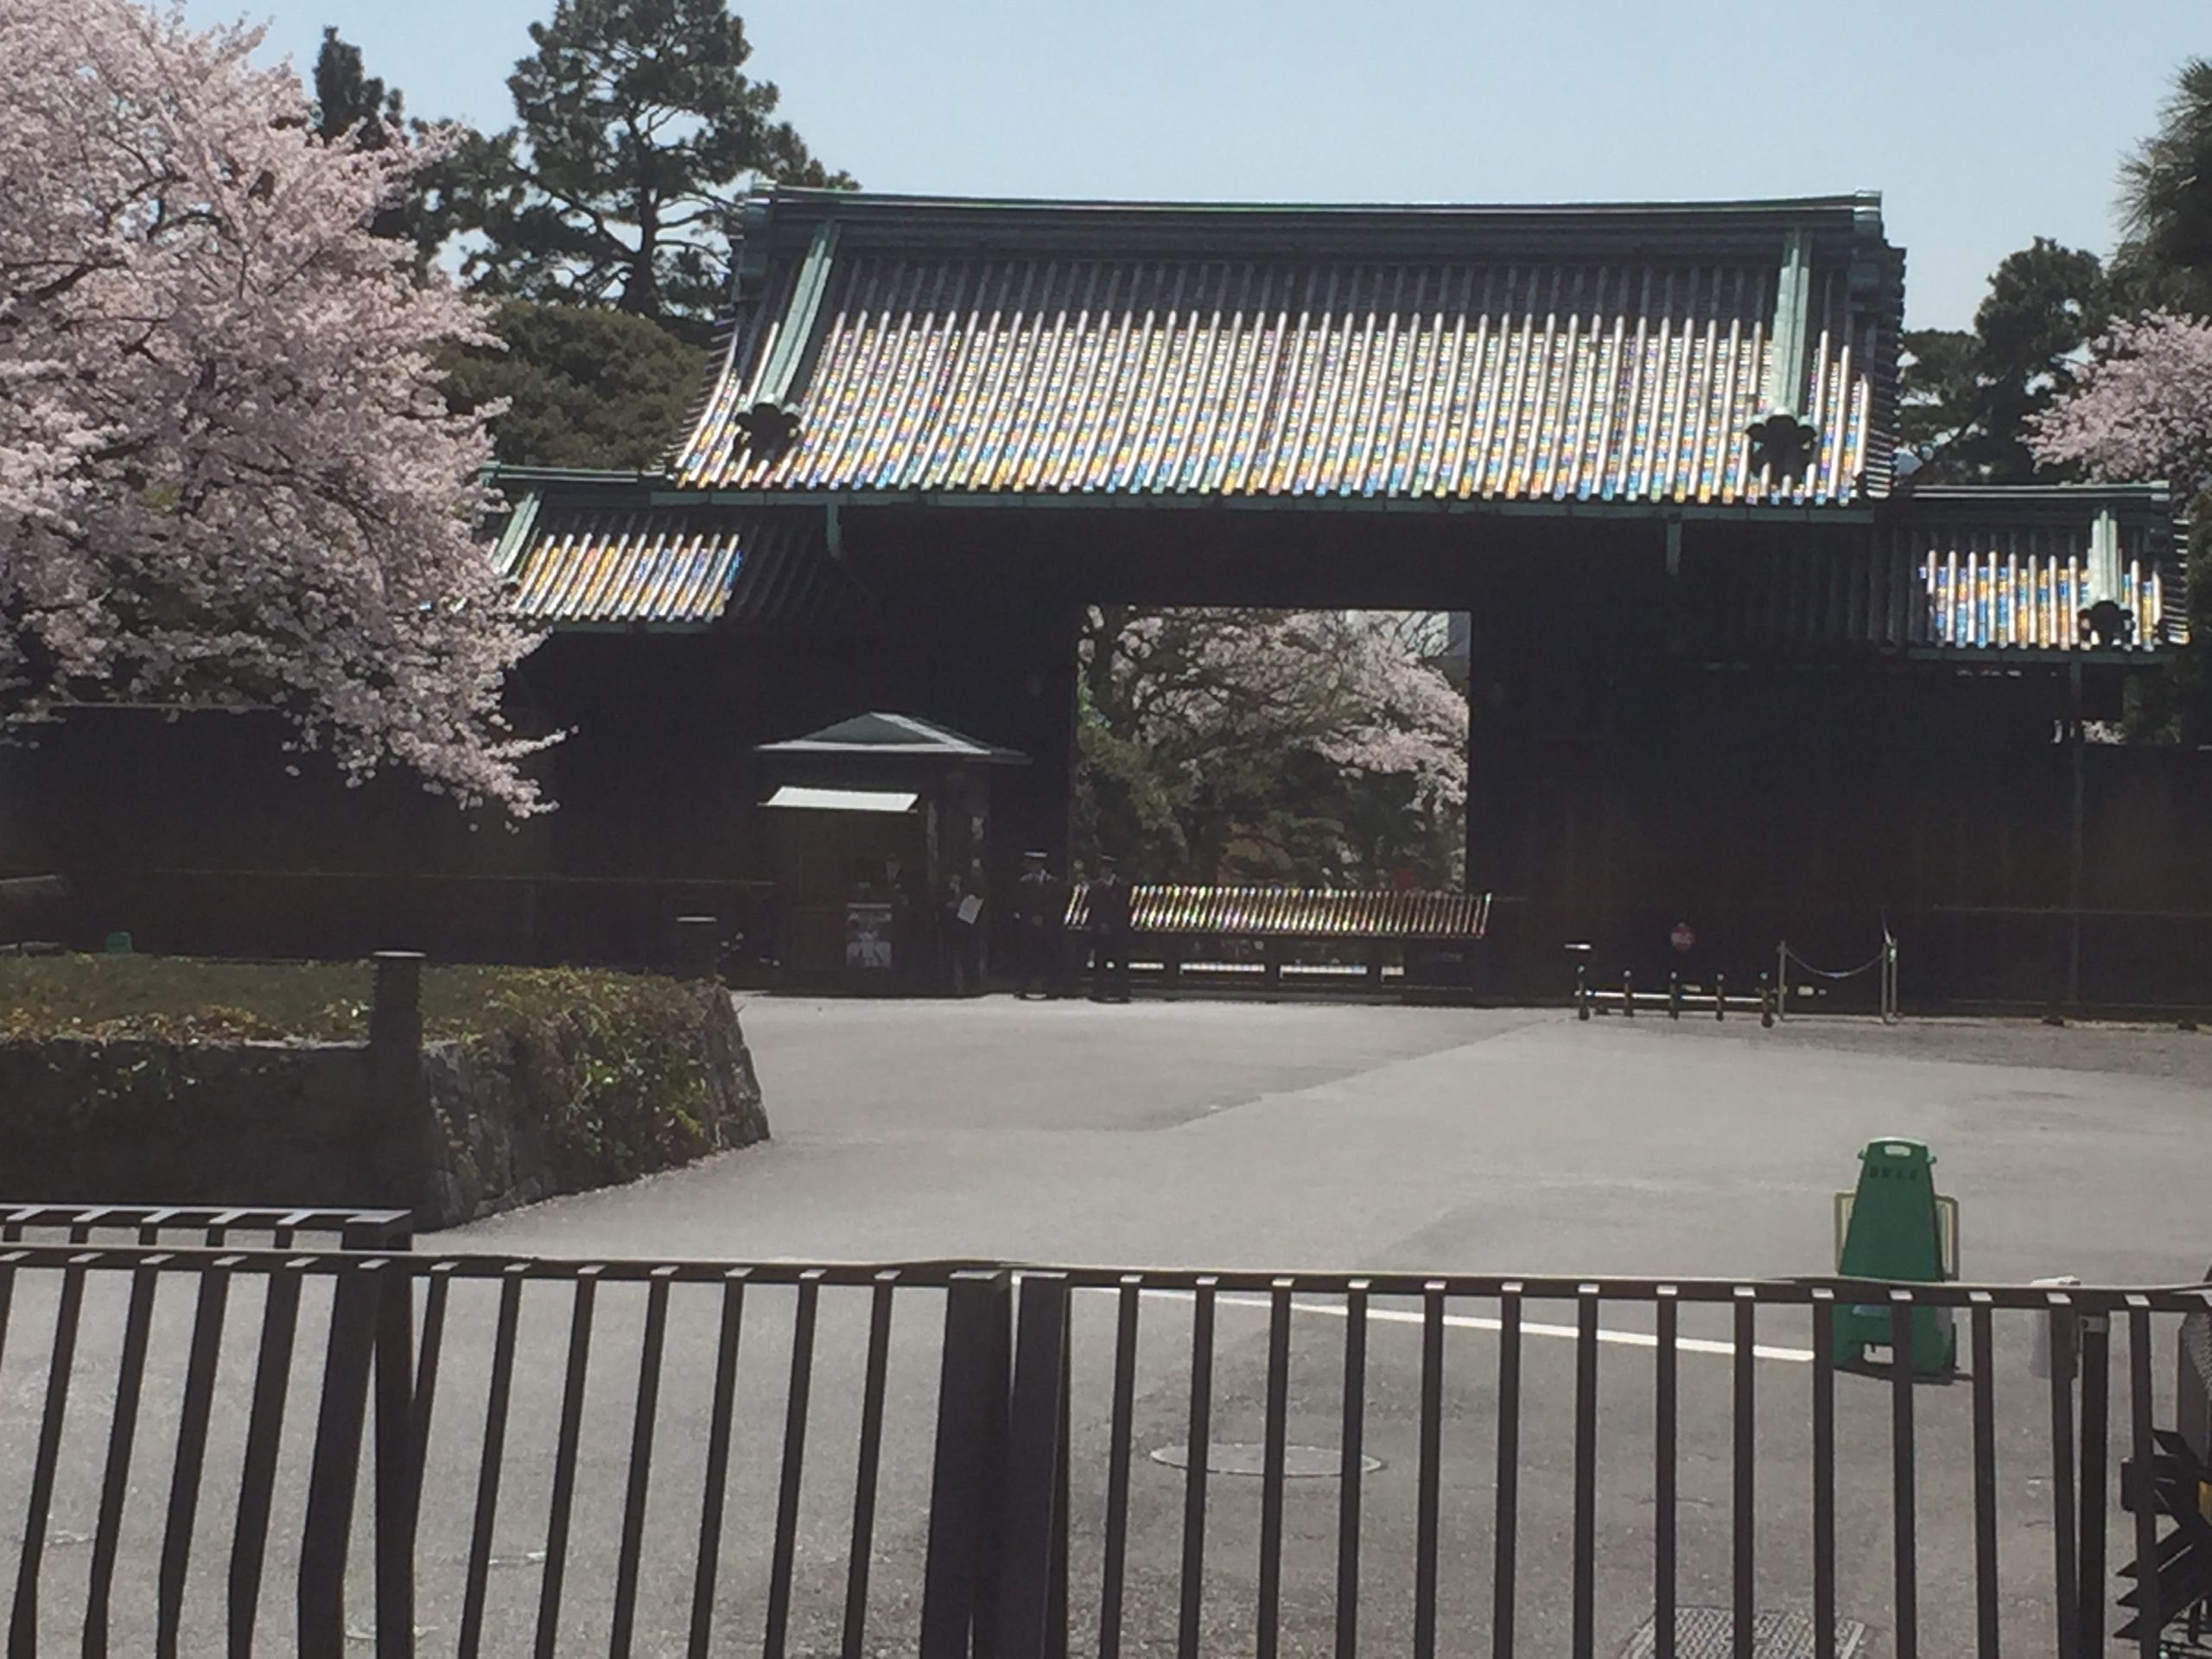 Voldgraven omkring Imperial Palace, Chiyoda, april 2015